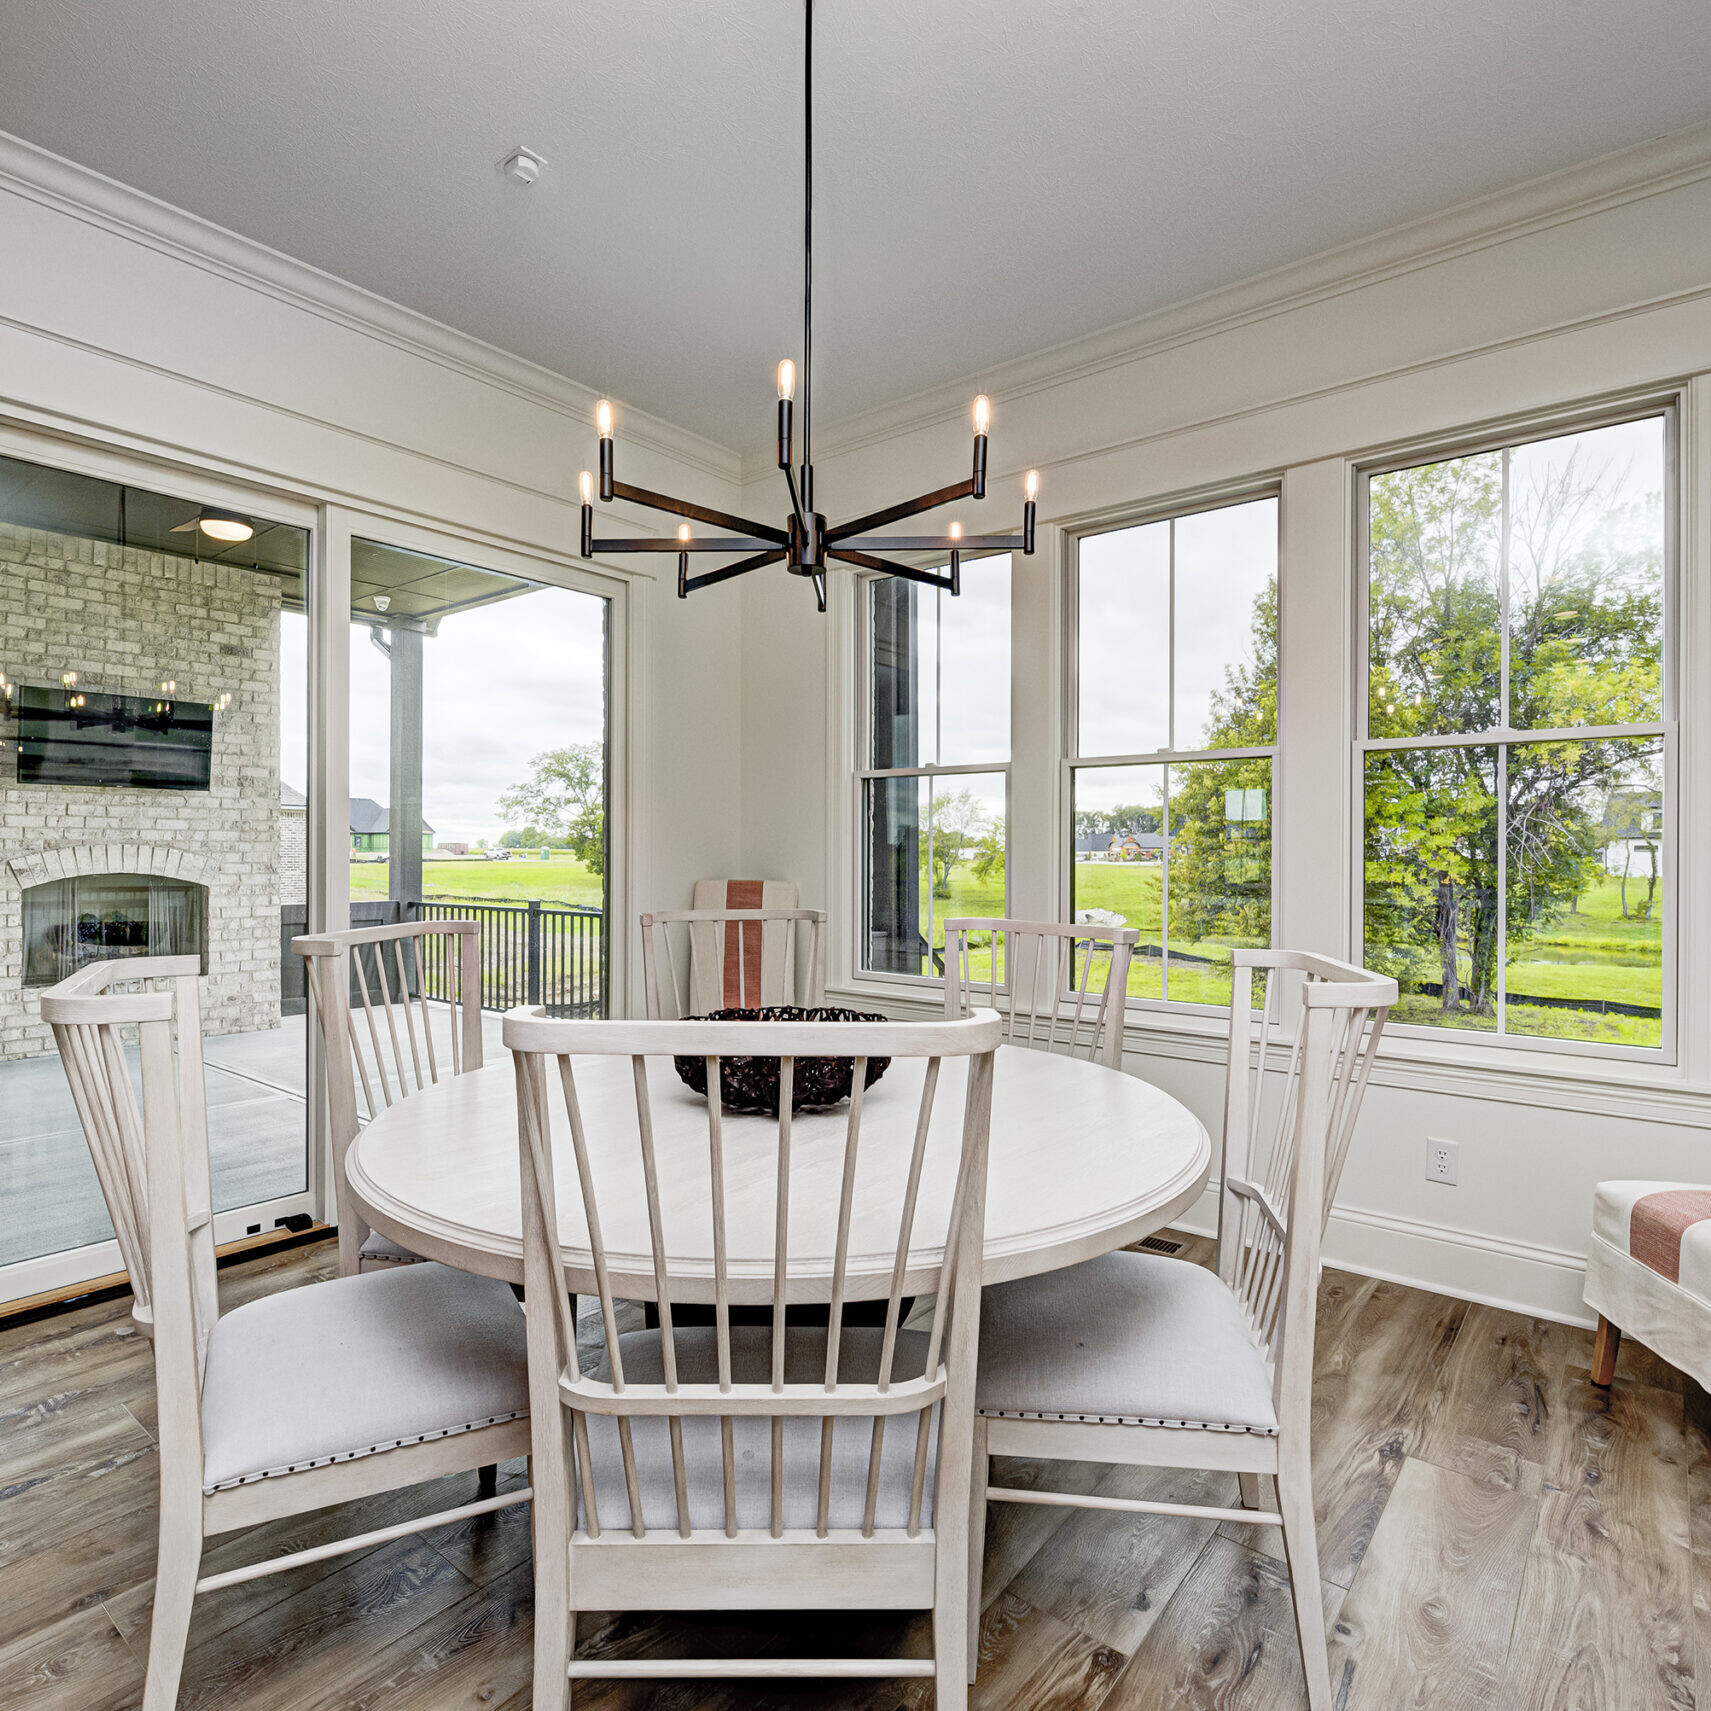 A dining room with hardwood floors and a sliding glass door, designed by a Custom Home Builder in Carmel Indiana.